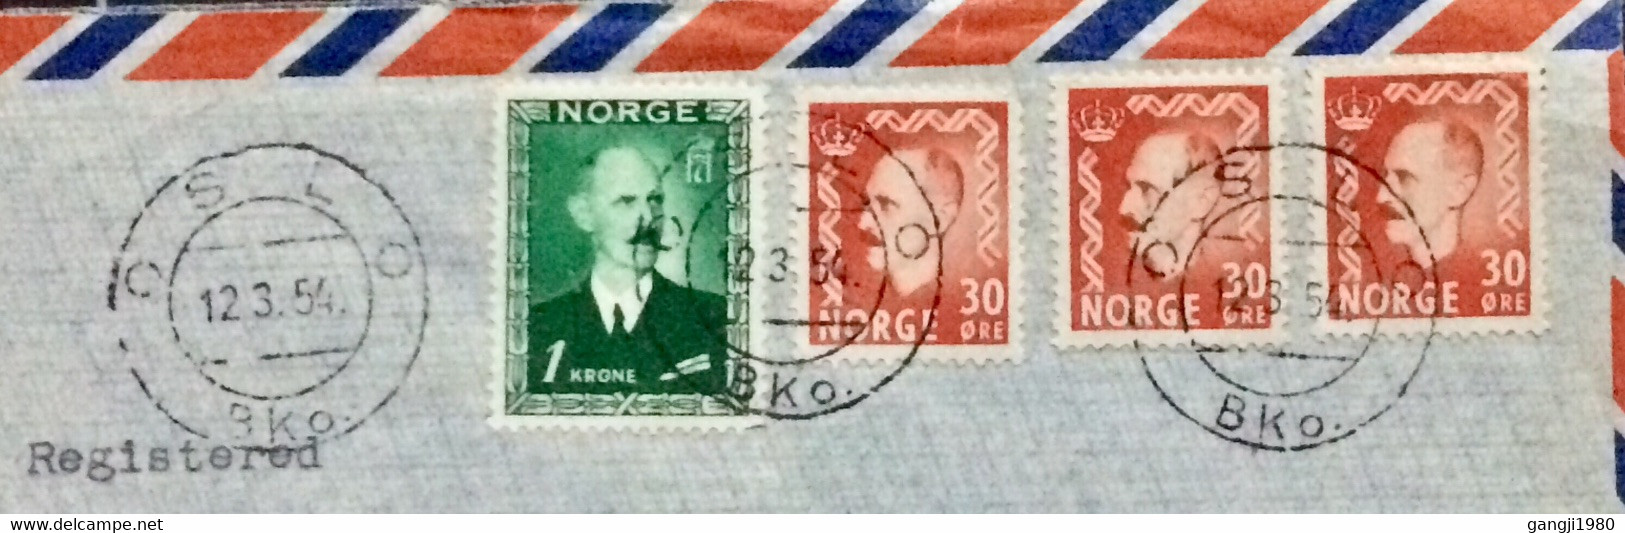 NORWAY 1954, PRIVATE COVER “EIDE” FIRM, USED TO USA,KING HARKON 4 STAMPS, REGISTER OSLO & DETROIT CITY CANCEL. - Storia Postale